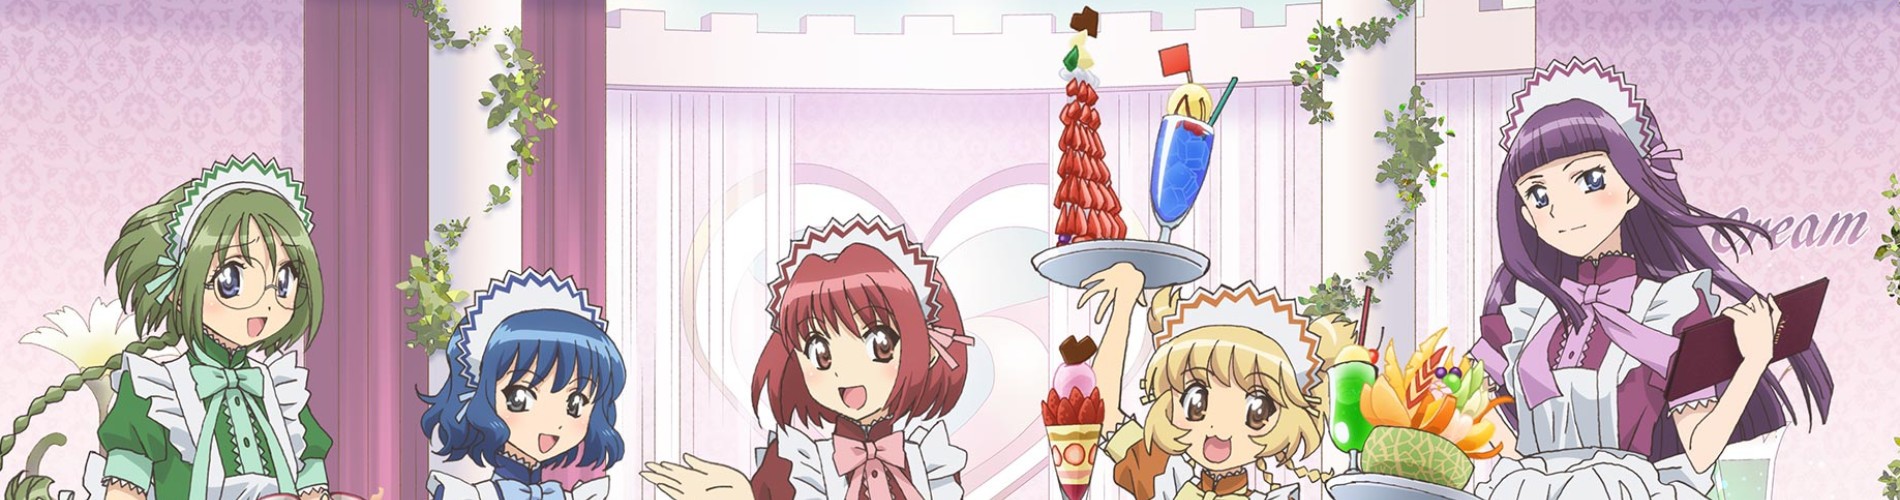 Tokyo Mew Mew New Releases First Trailer: Watch